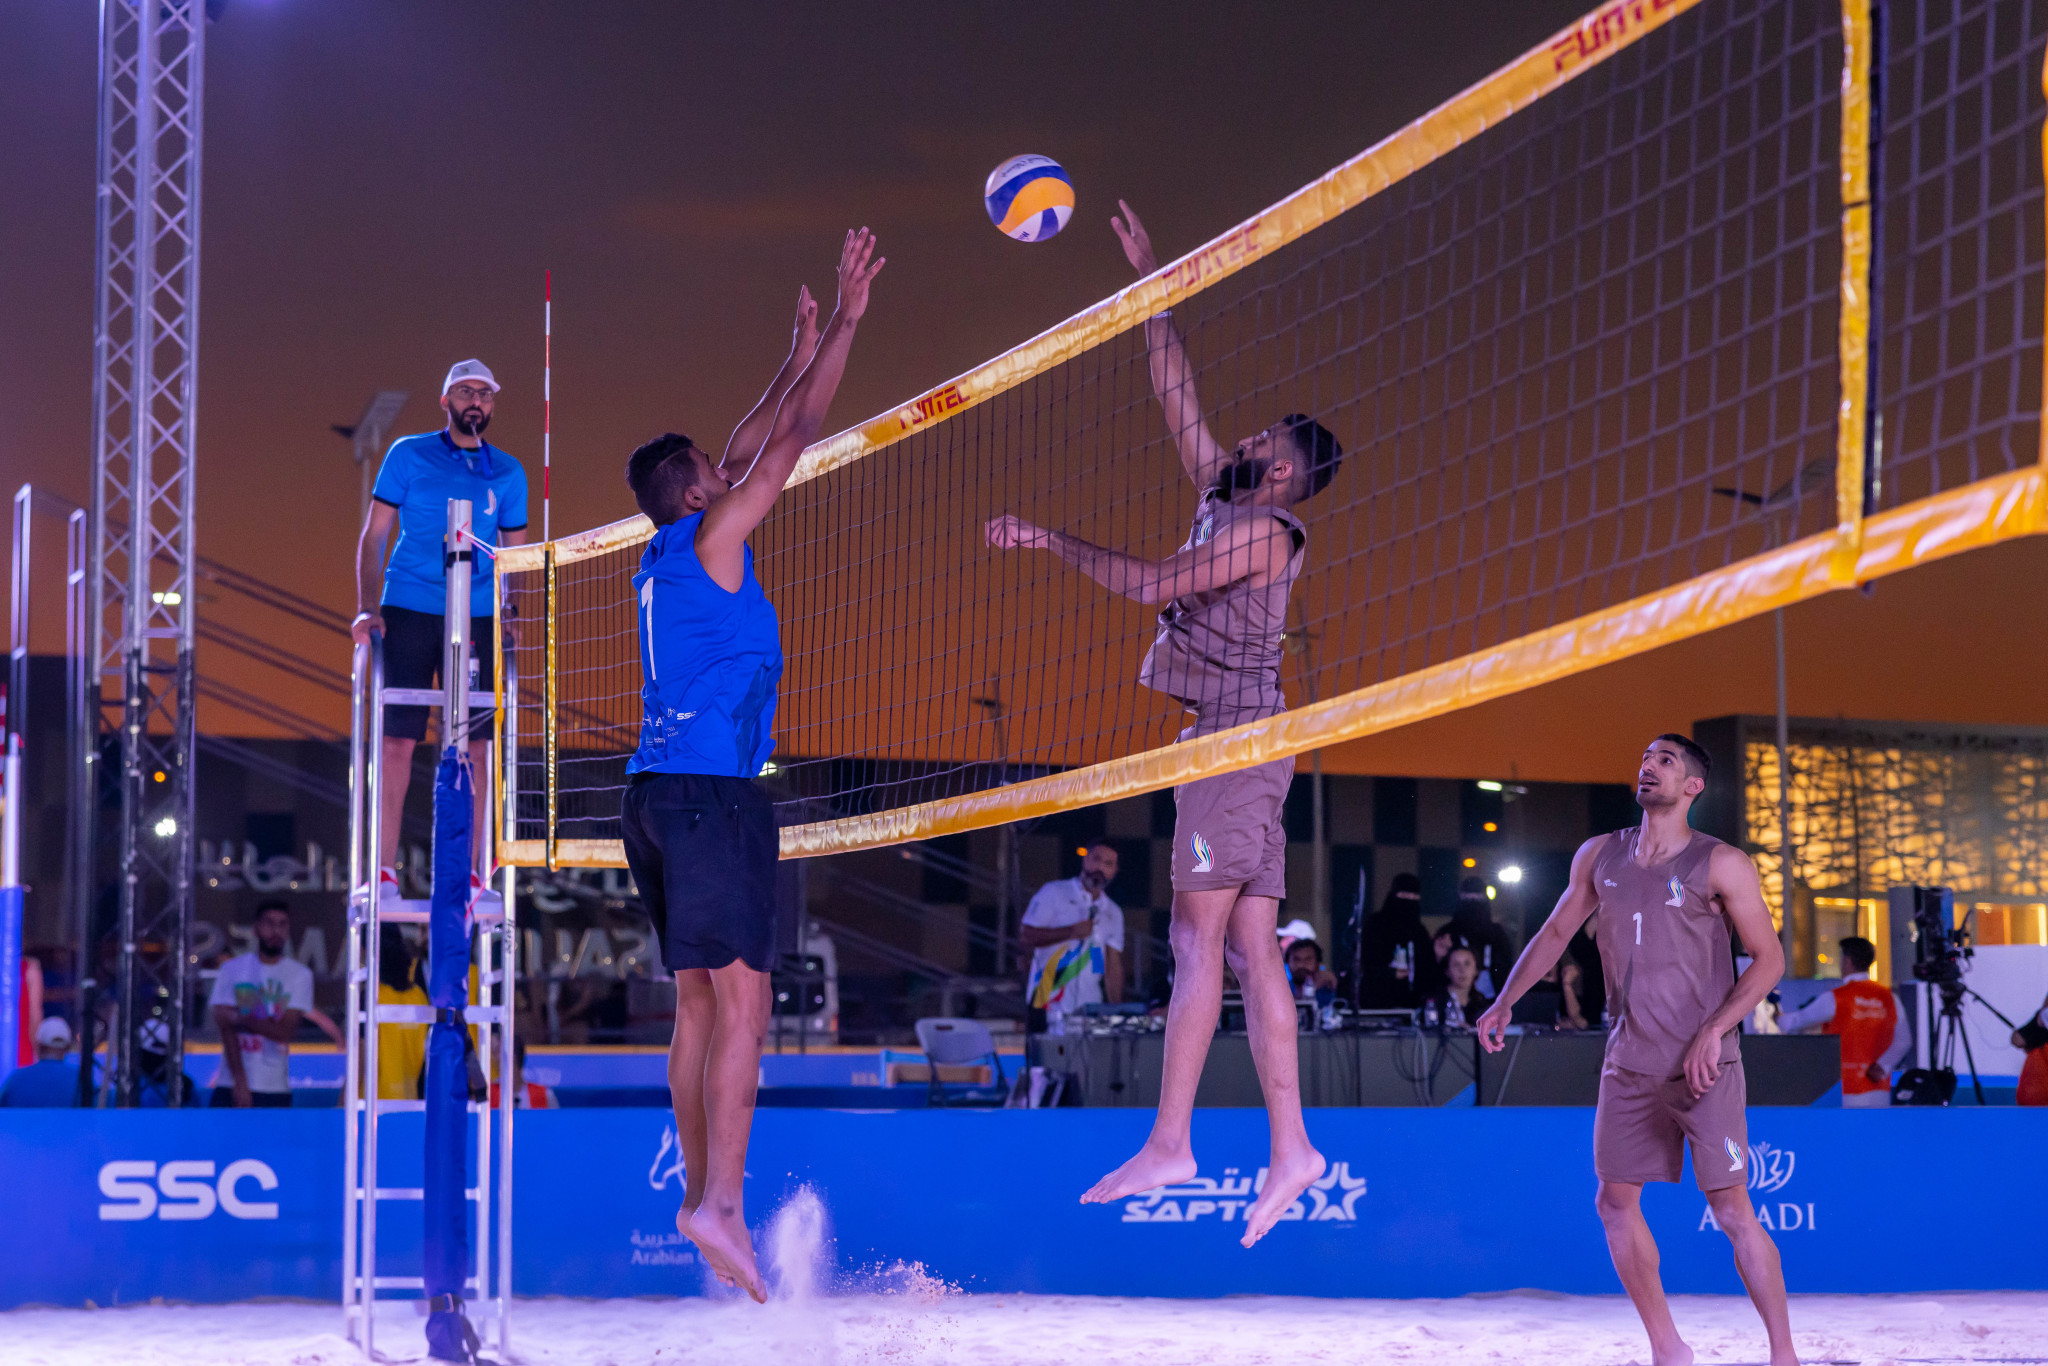 Round-of-16 beach volleyball matches were held under the night sky ©Saudi Games